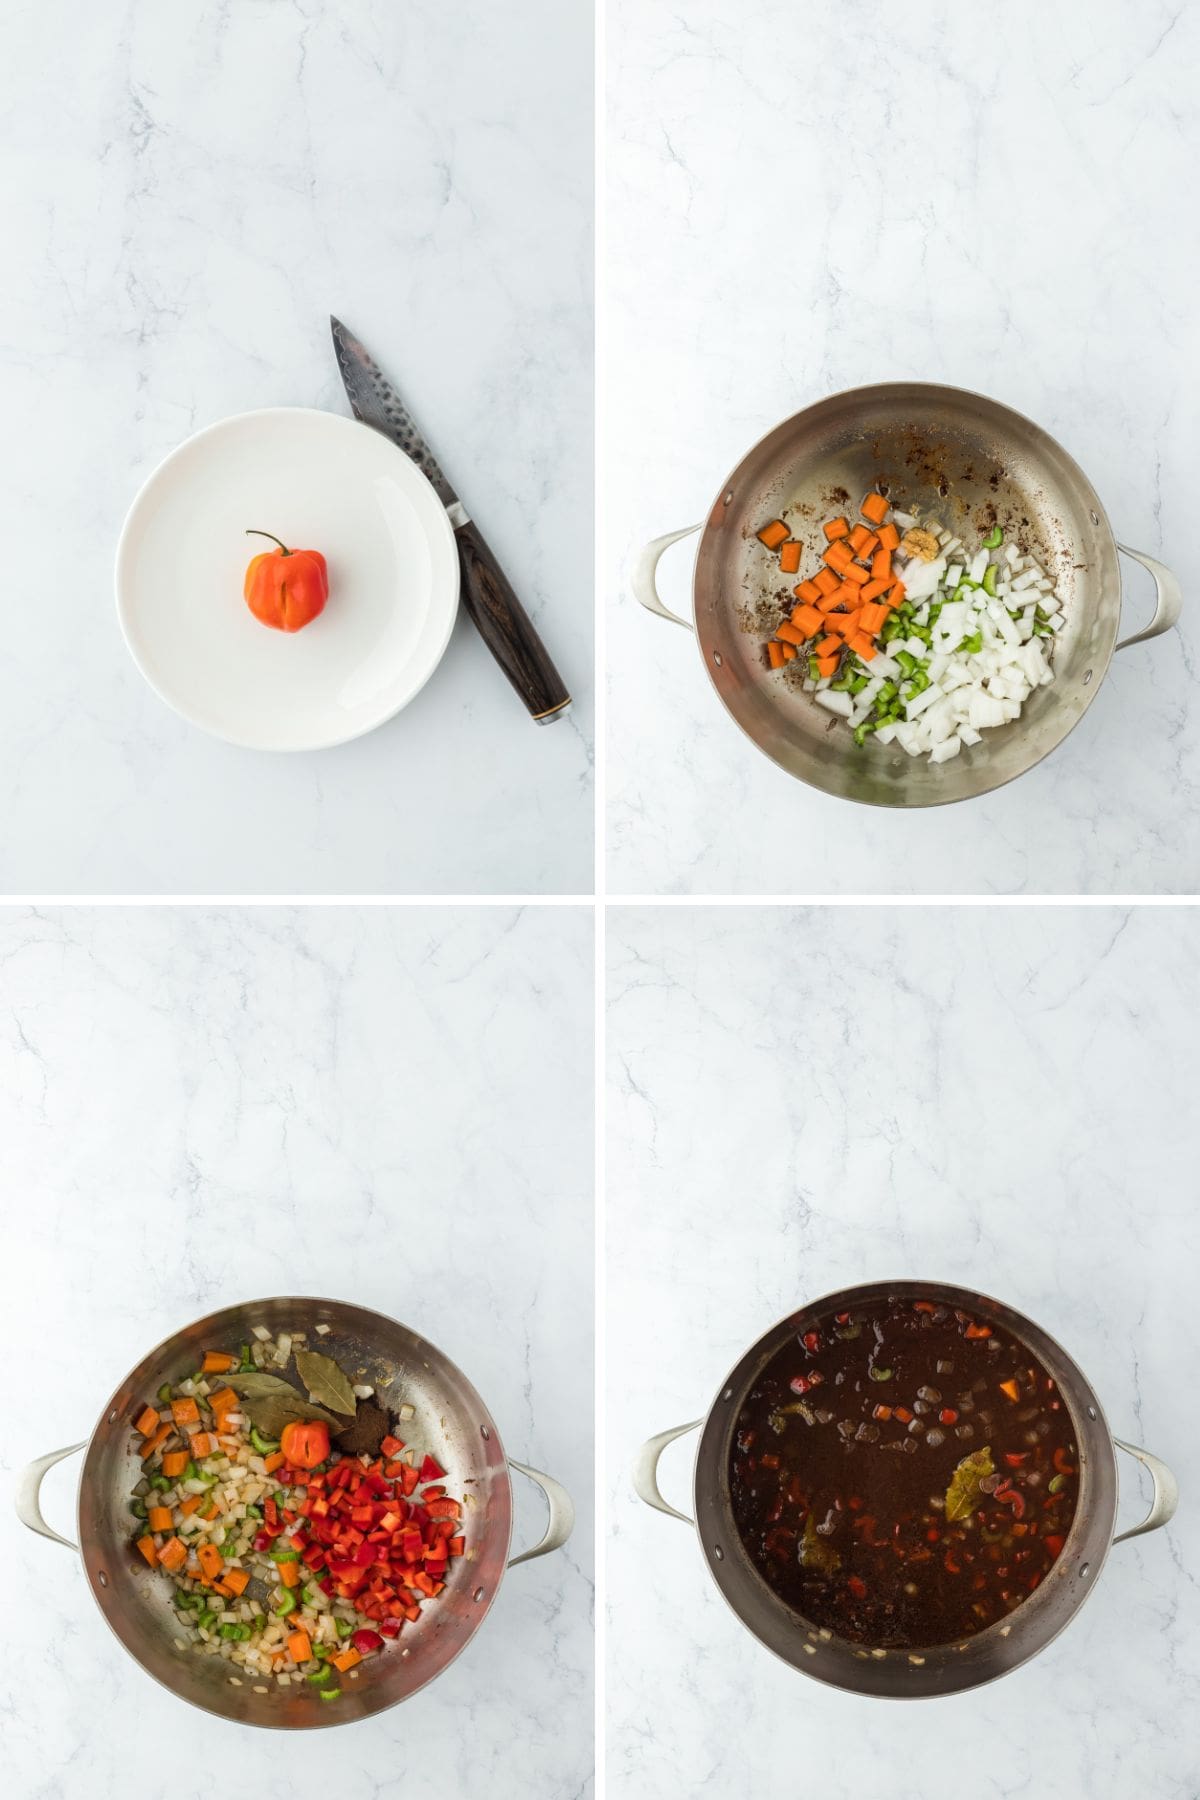 A step by step image collage of how to make Jamaican Oxtail with slicing the habanero pepper, sauteeing the veggies, and deglazing the pot with wine